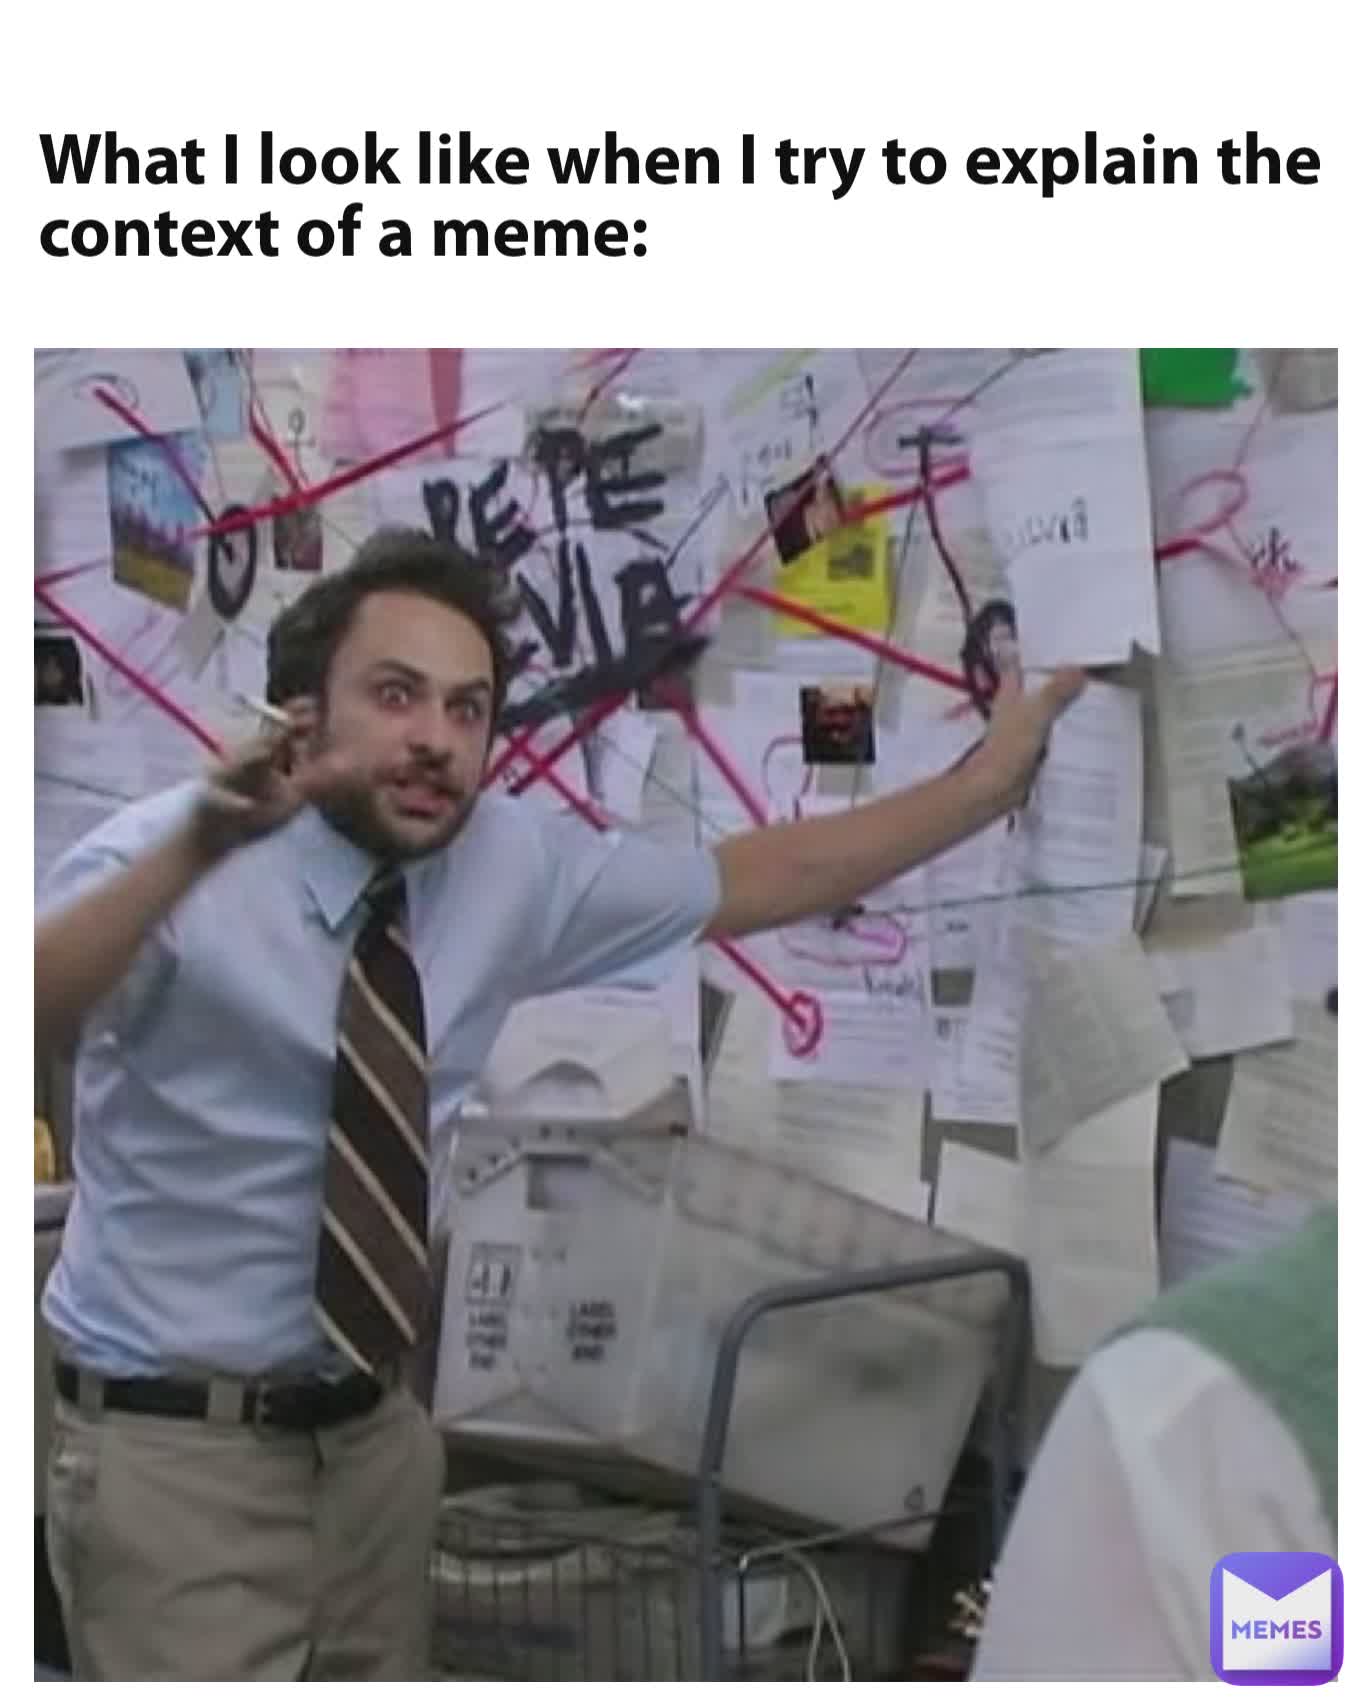 What I look like when I try to explain the context of a meme: